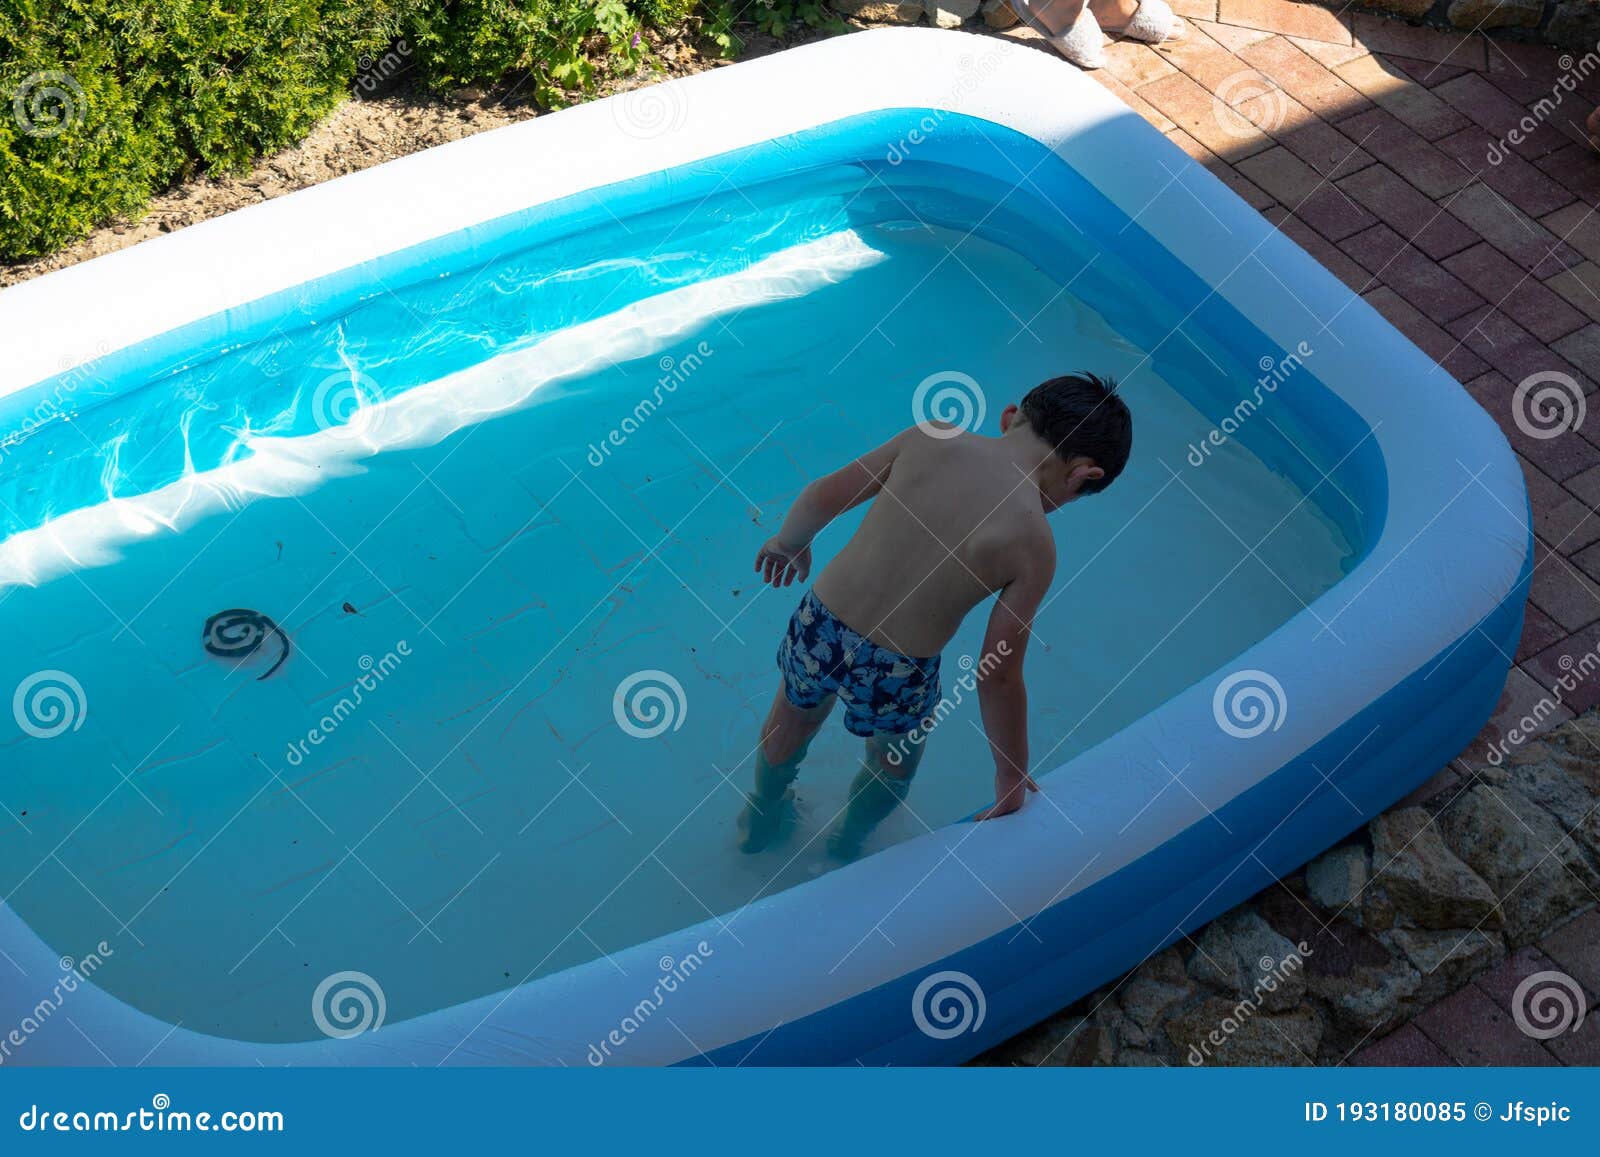 little child swimming in pool